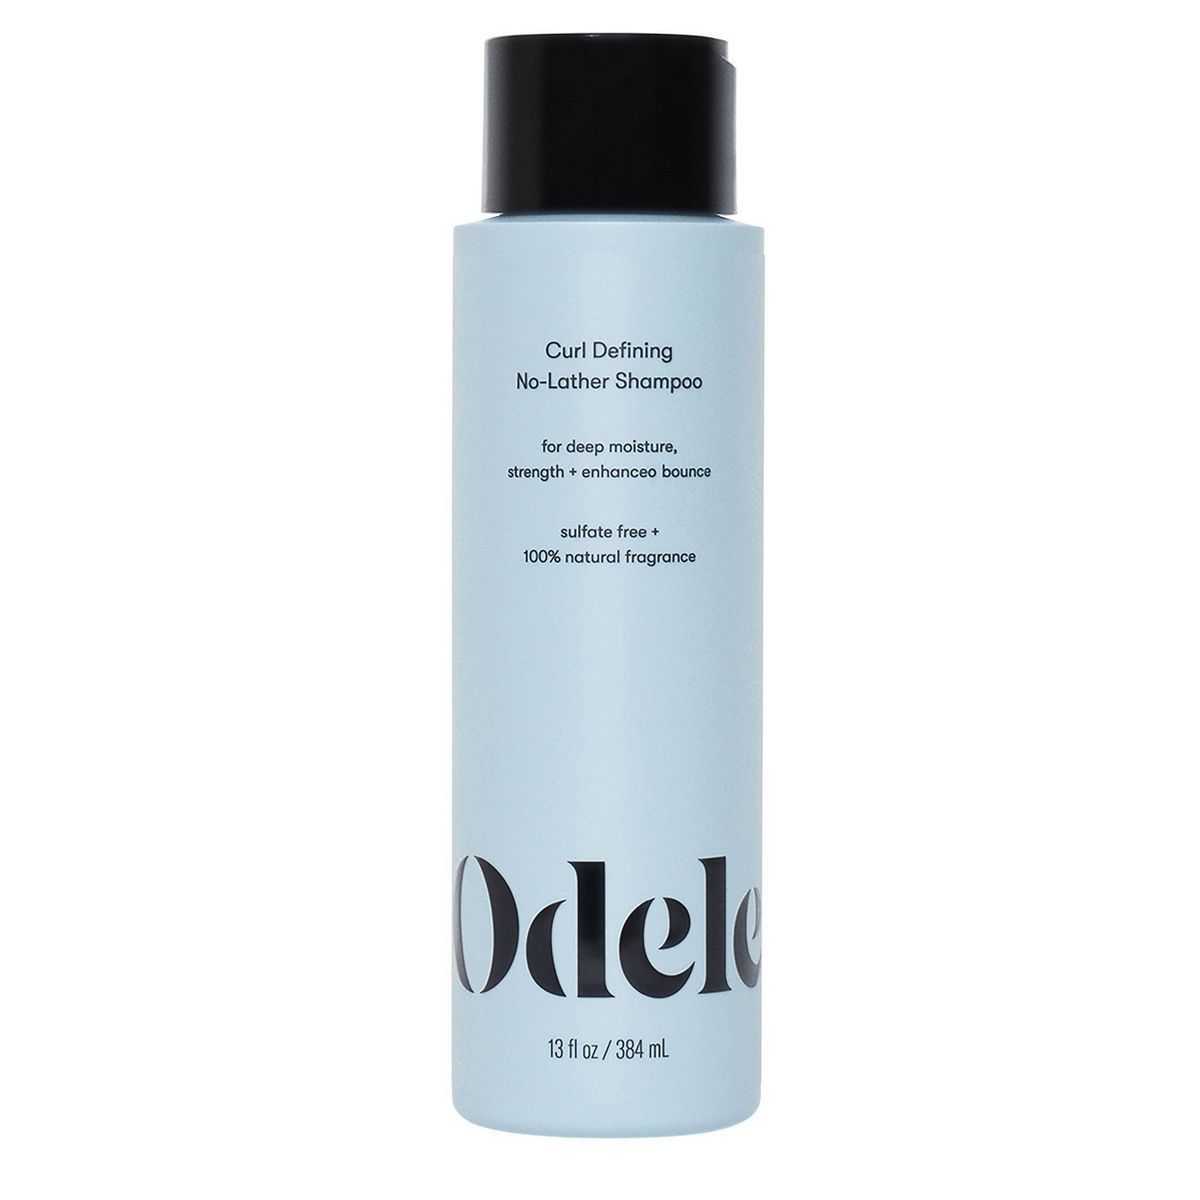 Odele Curl Defining No Lather Shampoo Sulfate Free for Curly to Coily Hair - 13 fl oz | Target